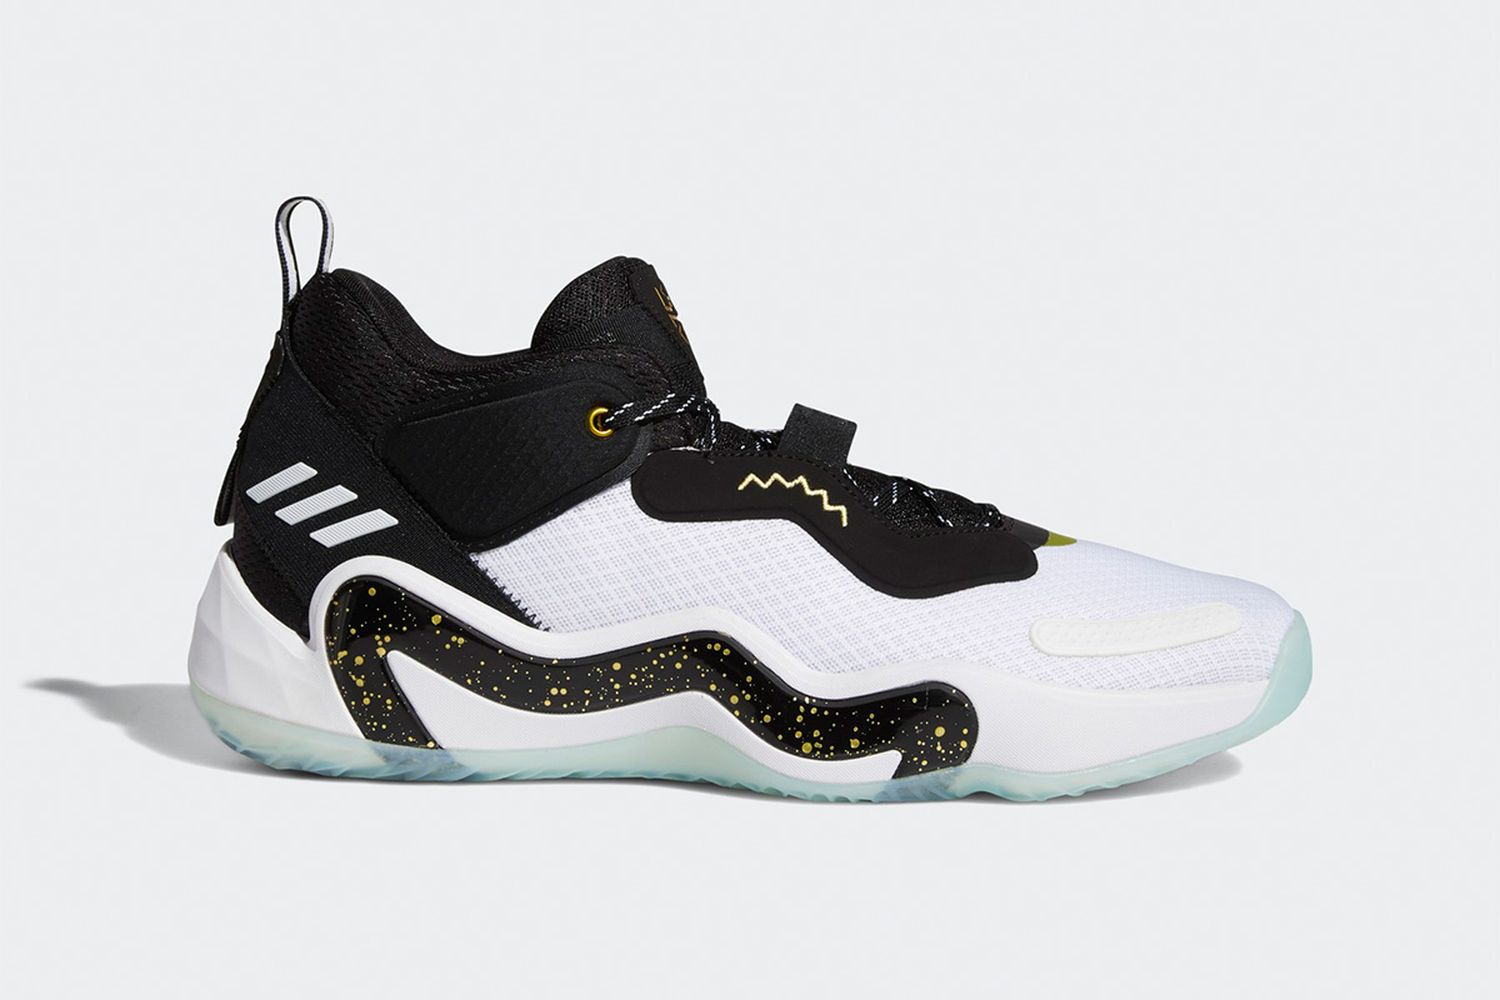 7 of the Best adidas Basketball Shoes to Buy in 2021